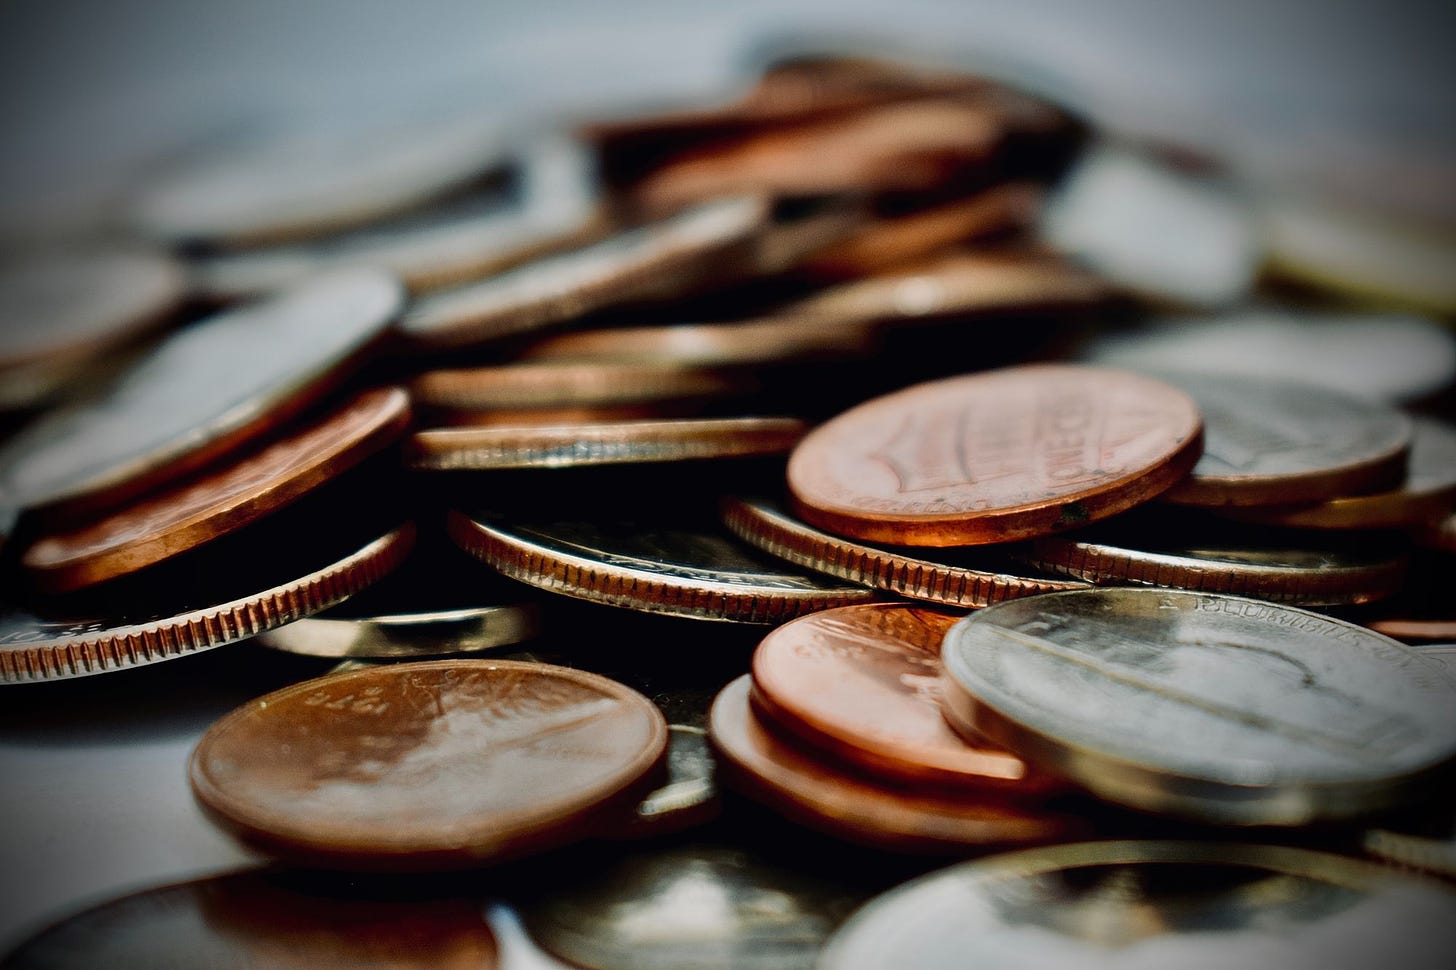 photo of coins by Amelia Spink via Unsplash